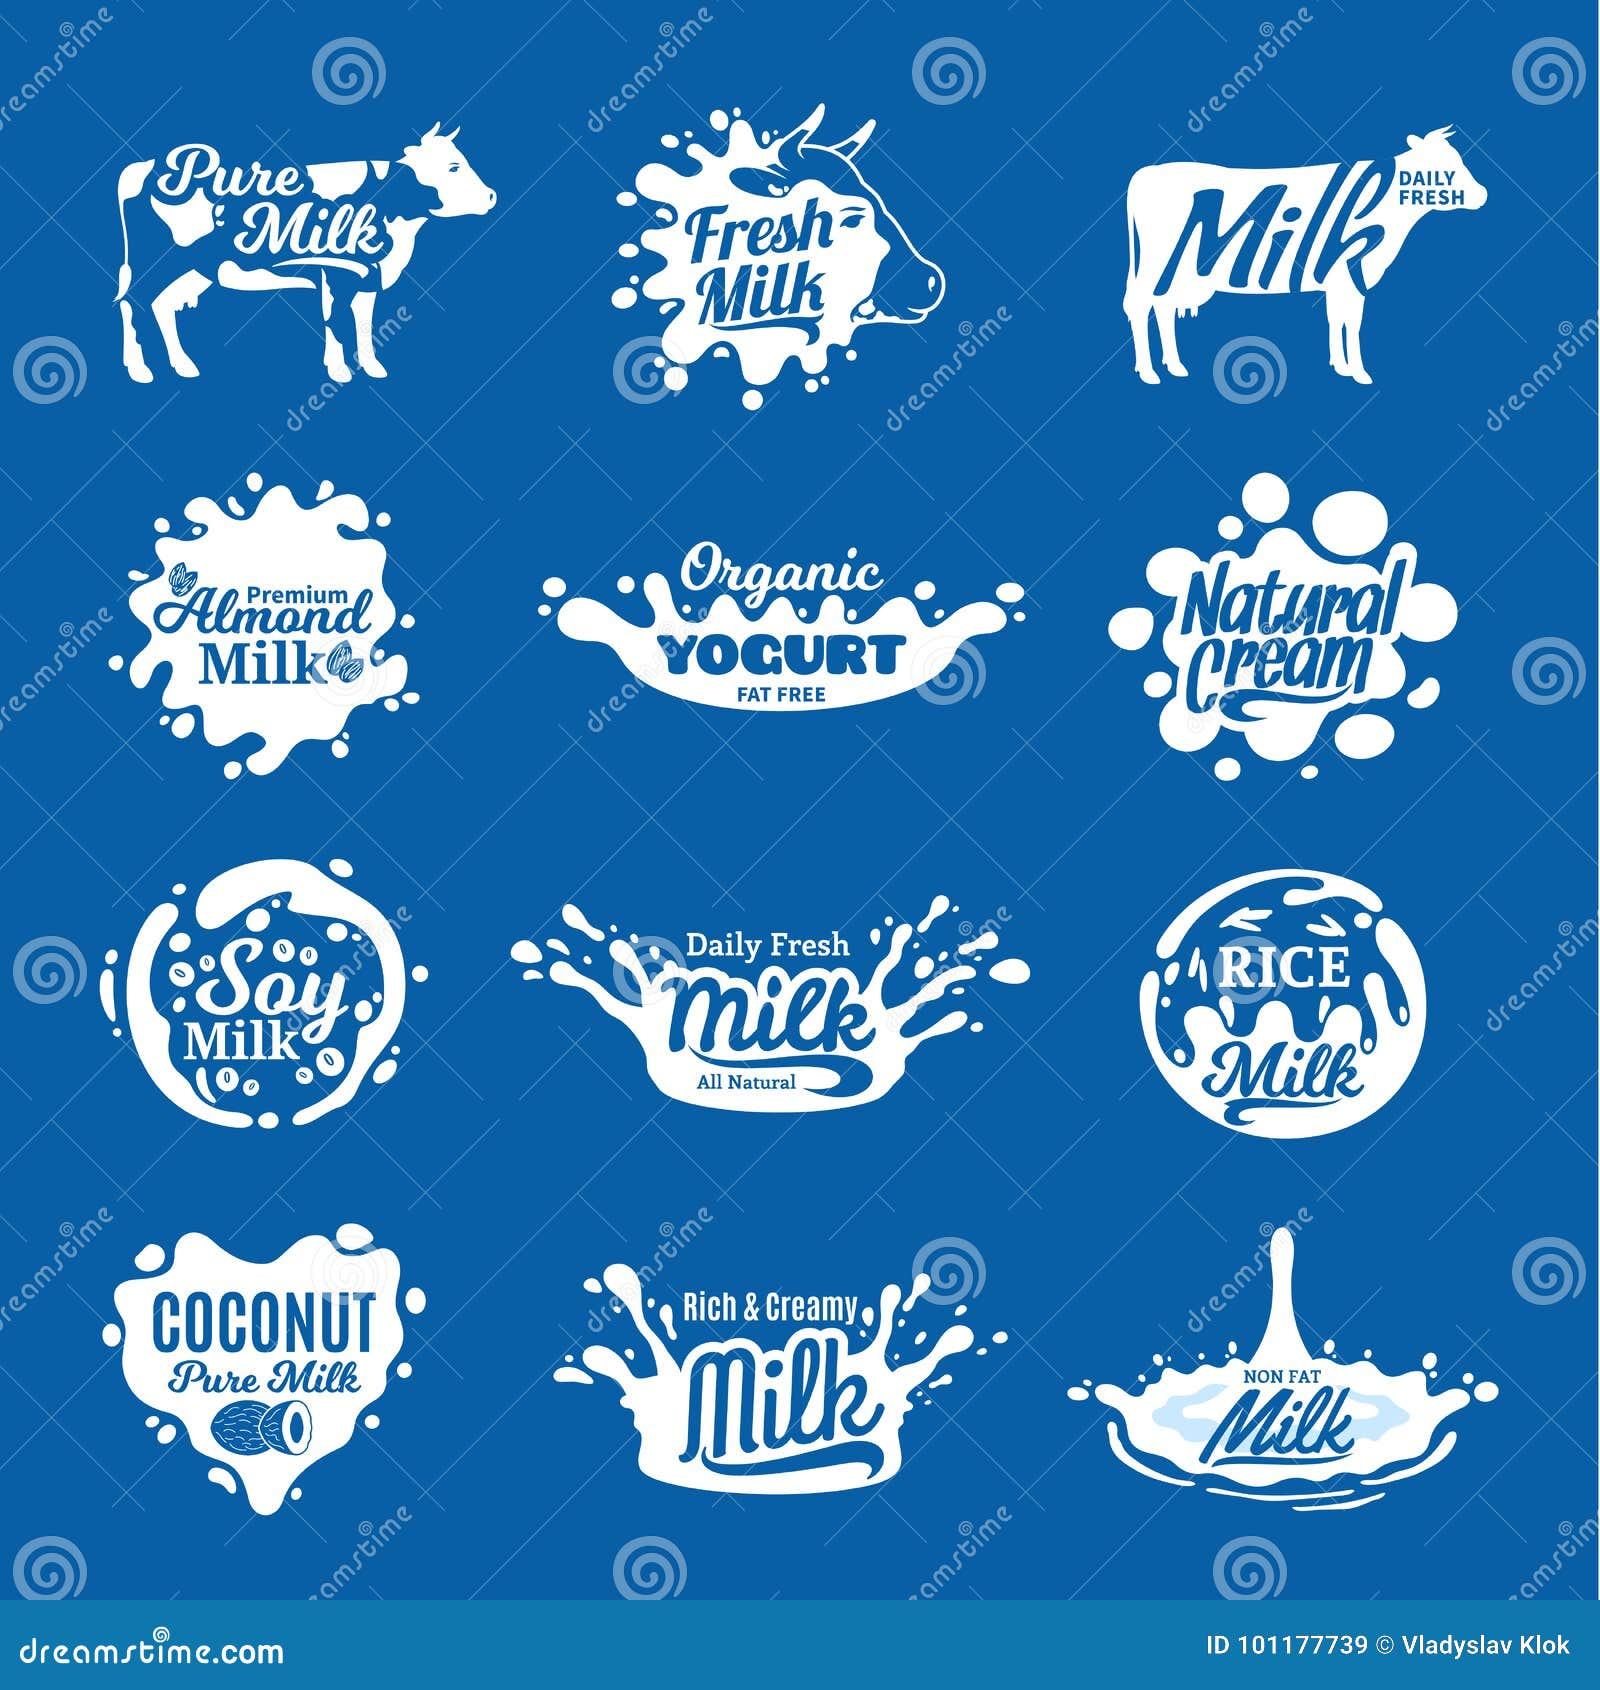 Dairy logo Images - Search Images on Everypixel